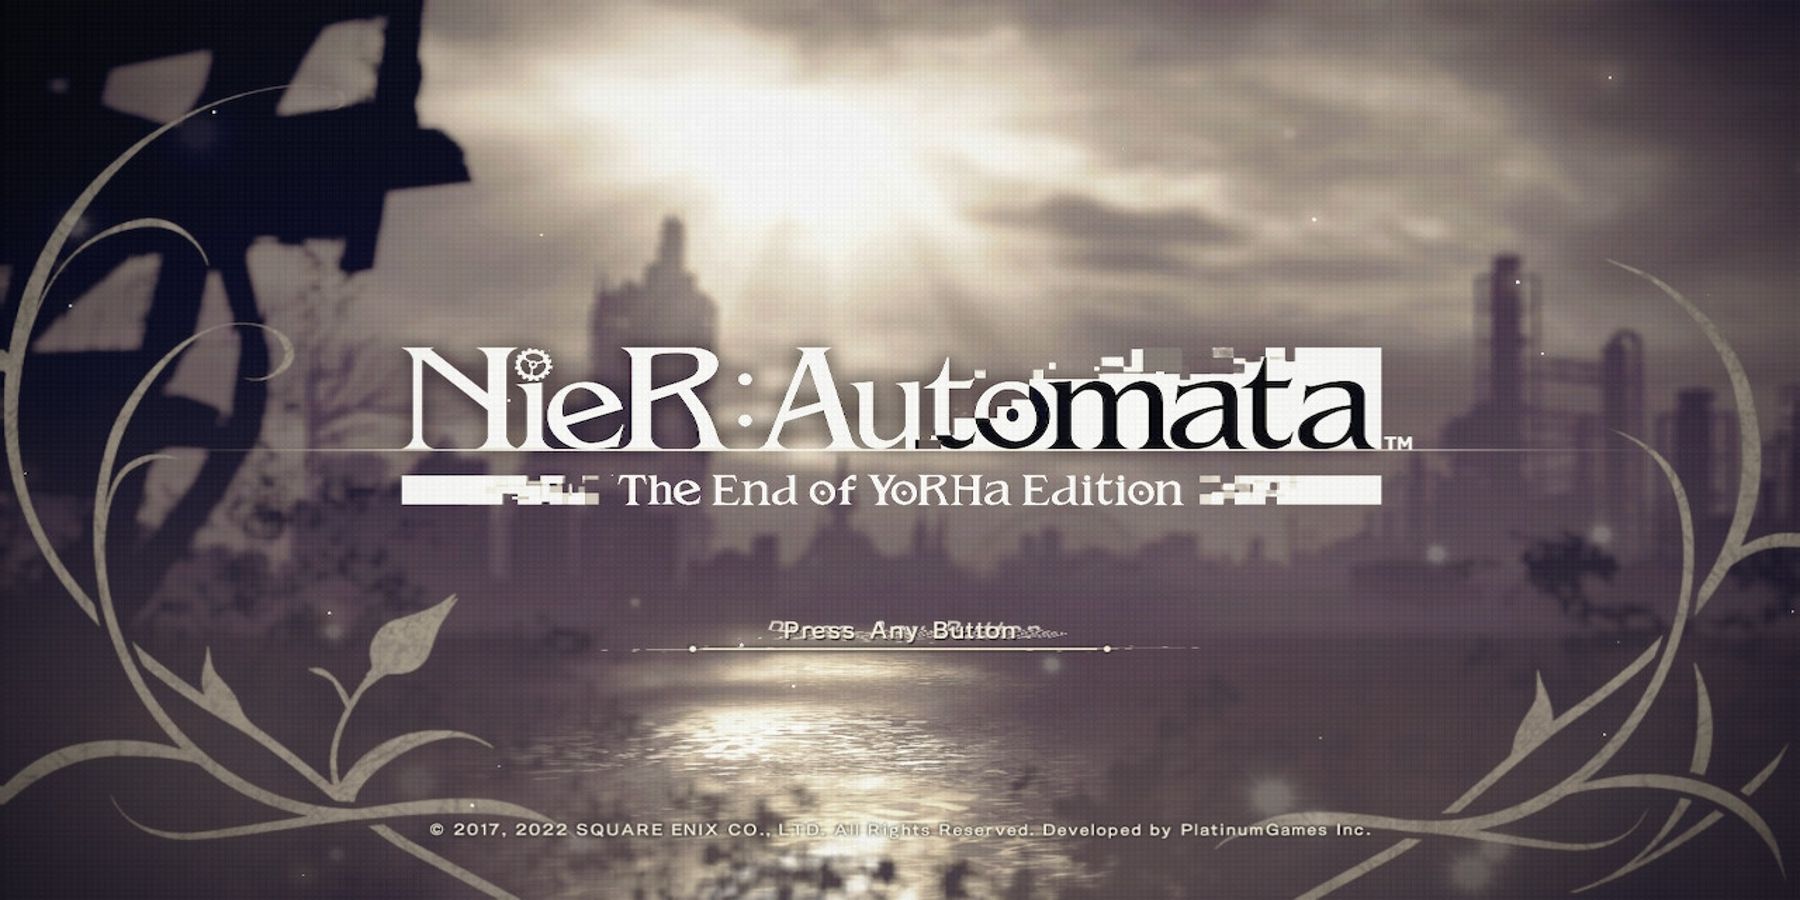 NieR: Automata The End of YoRHa Edition Review